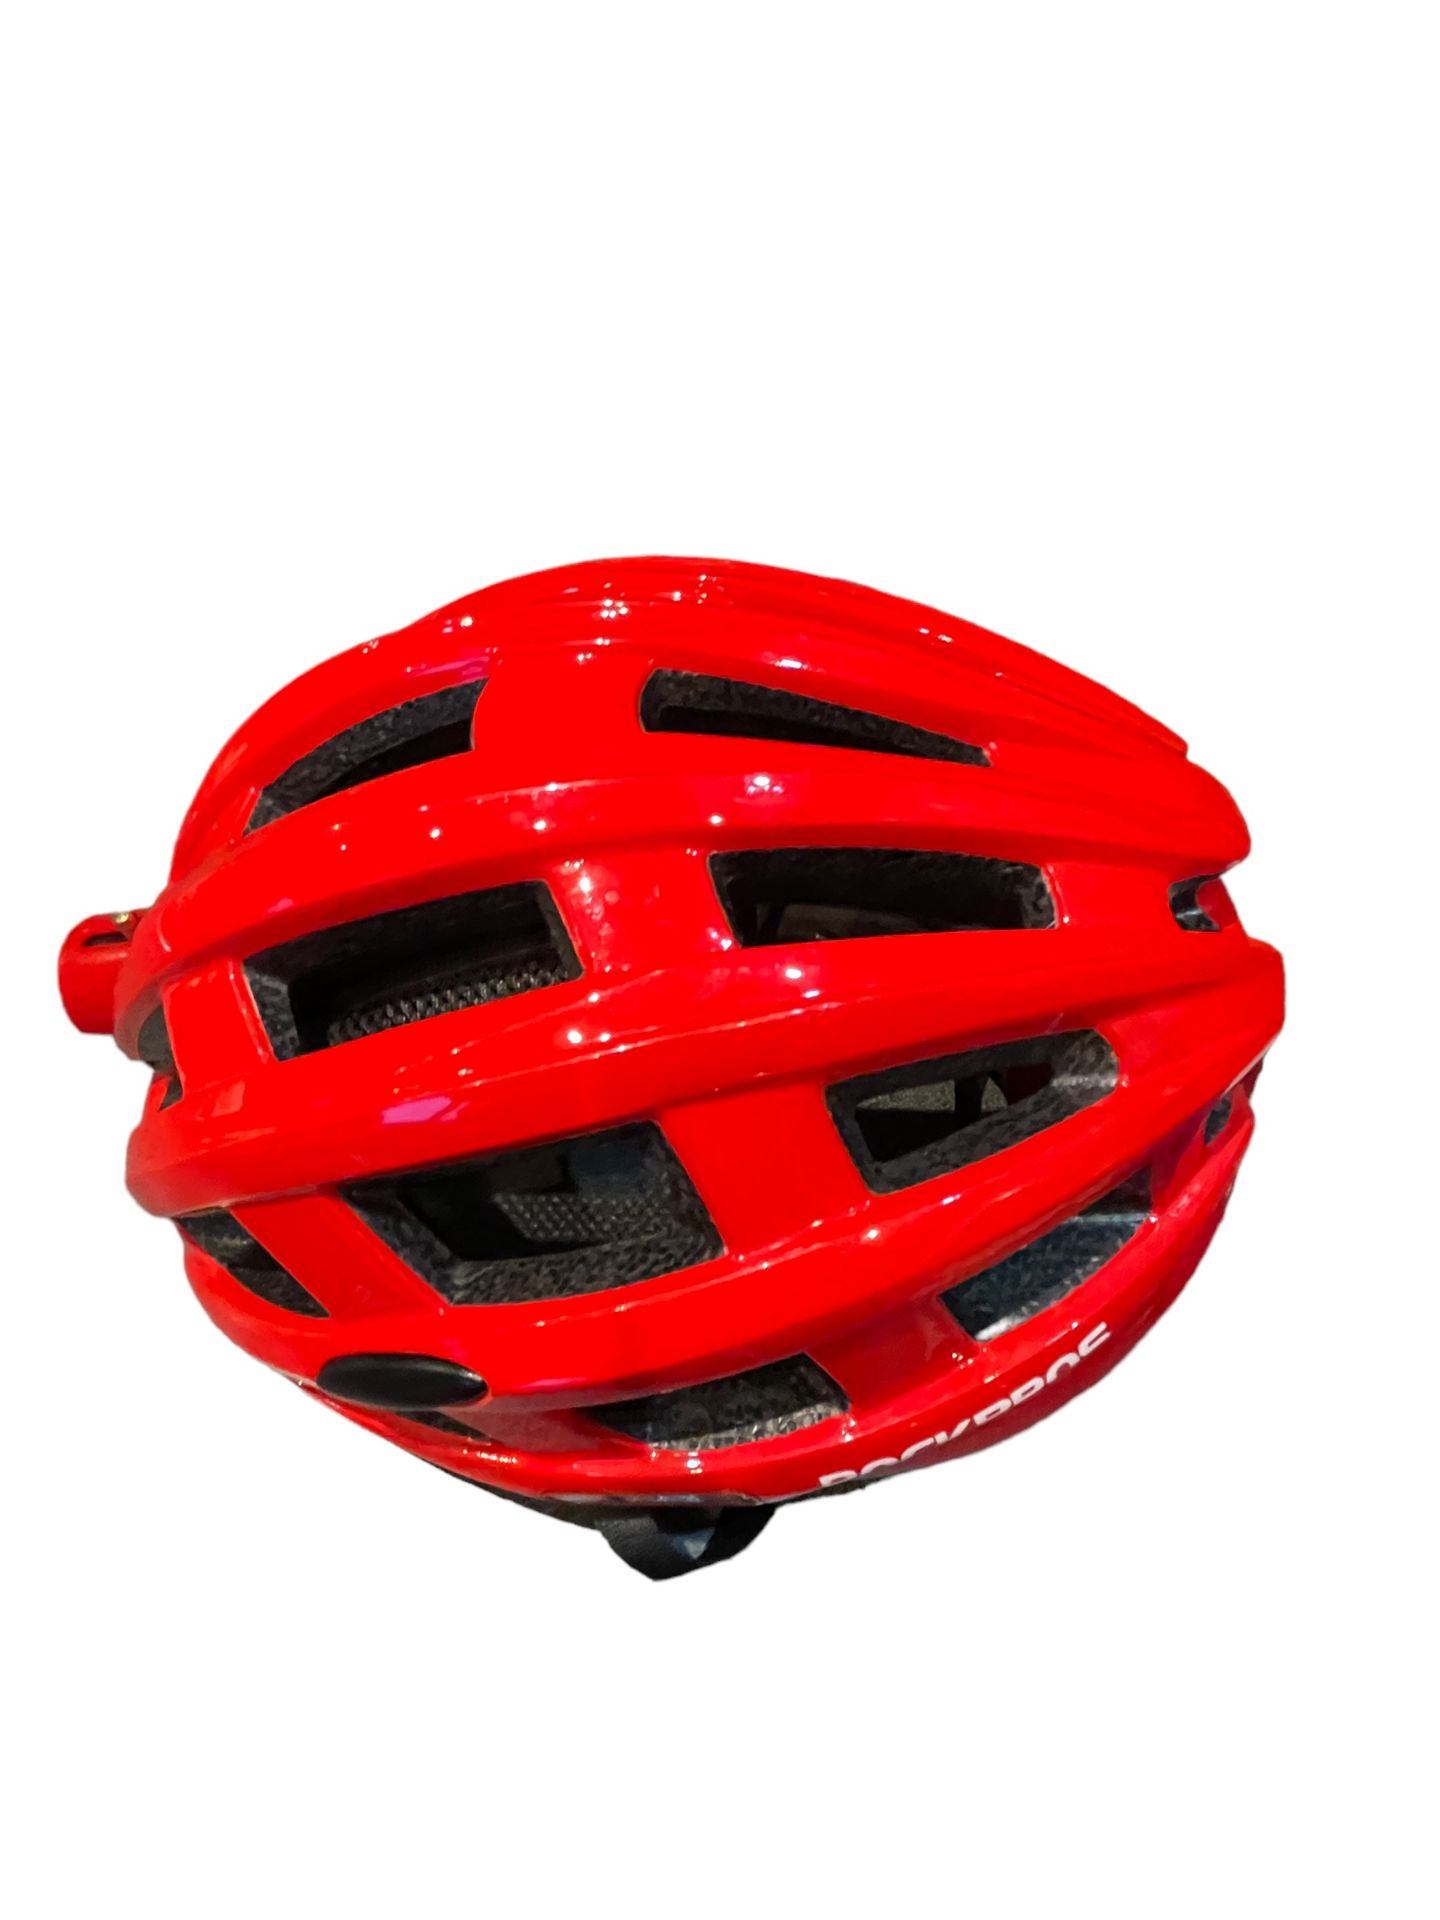 Rock Bros Cycling Helmet fully working boxed demo - Image 5 of 7